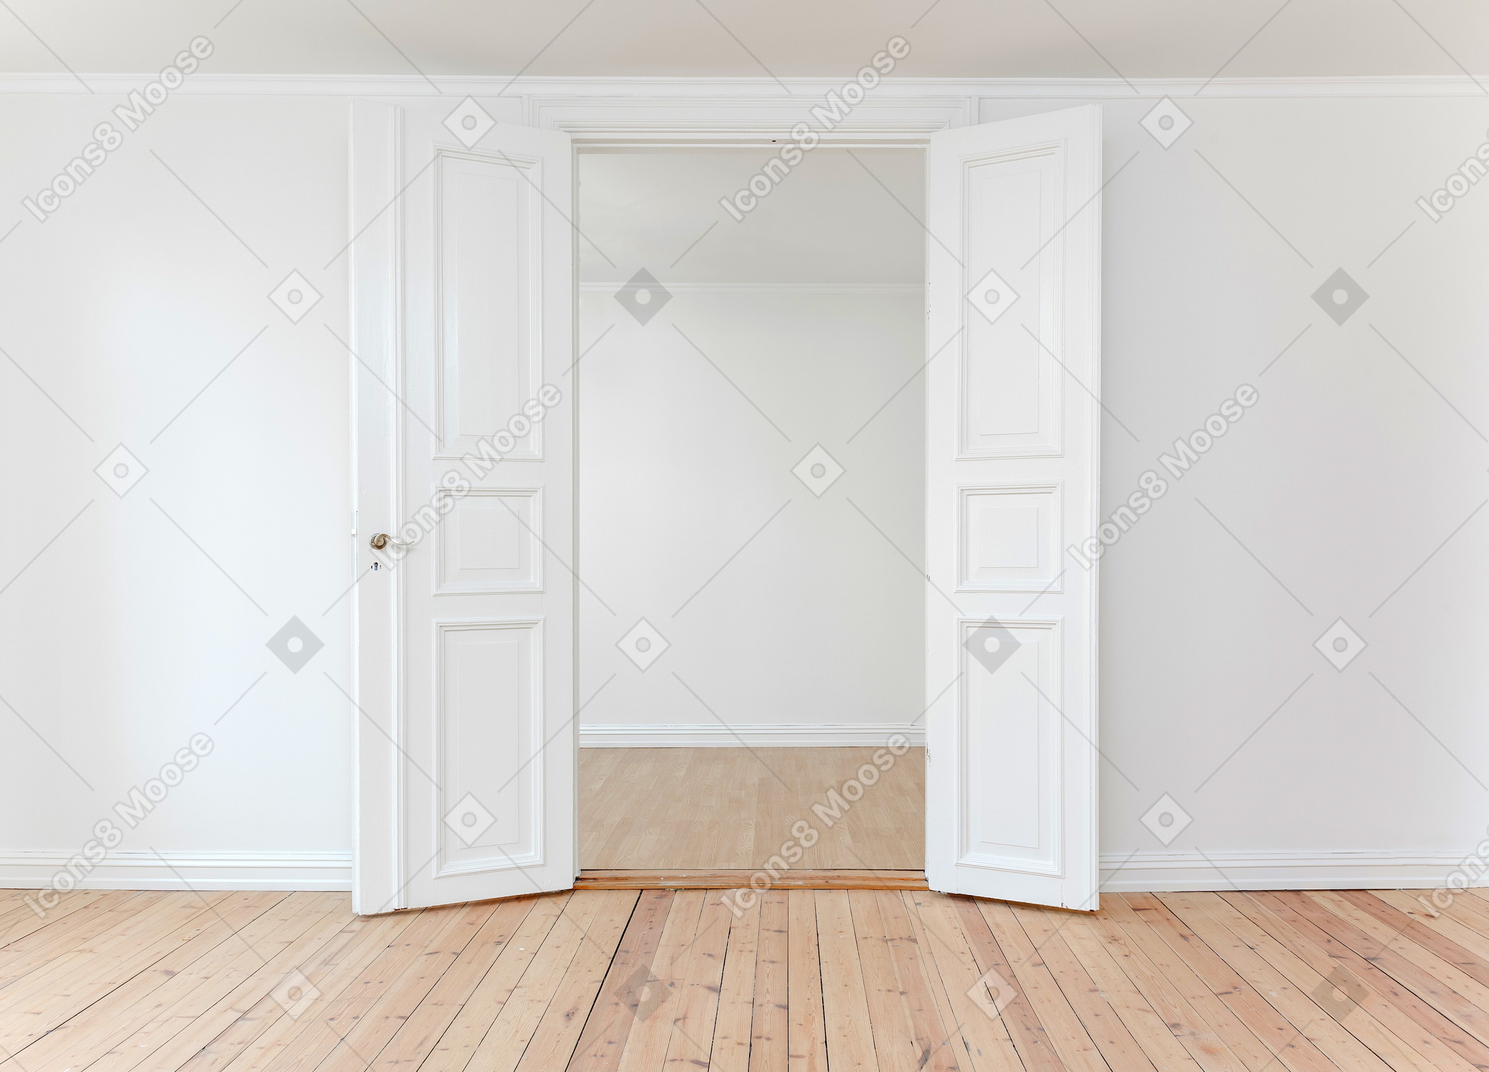 White wall and white door background